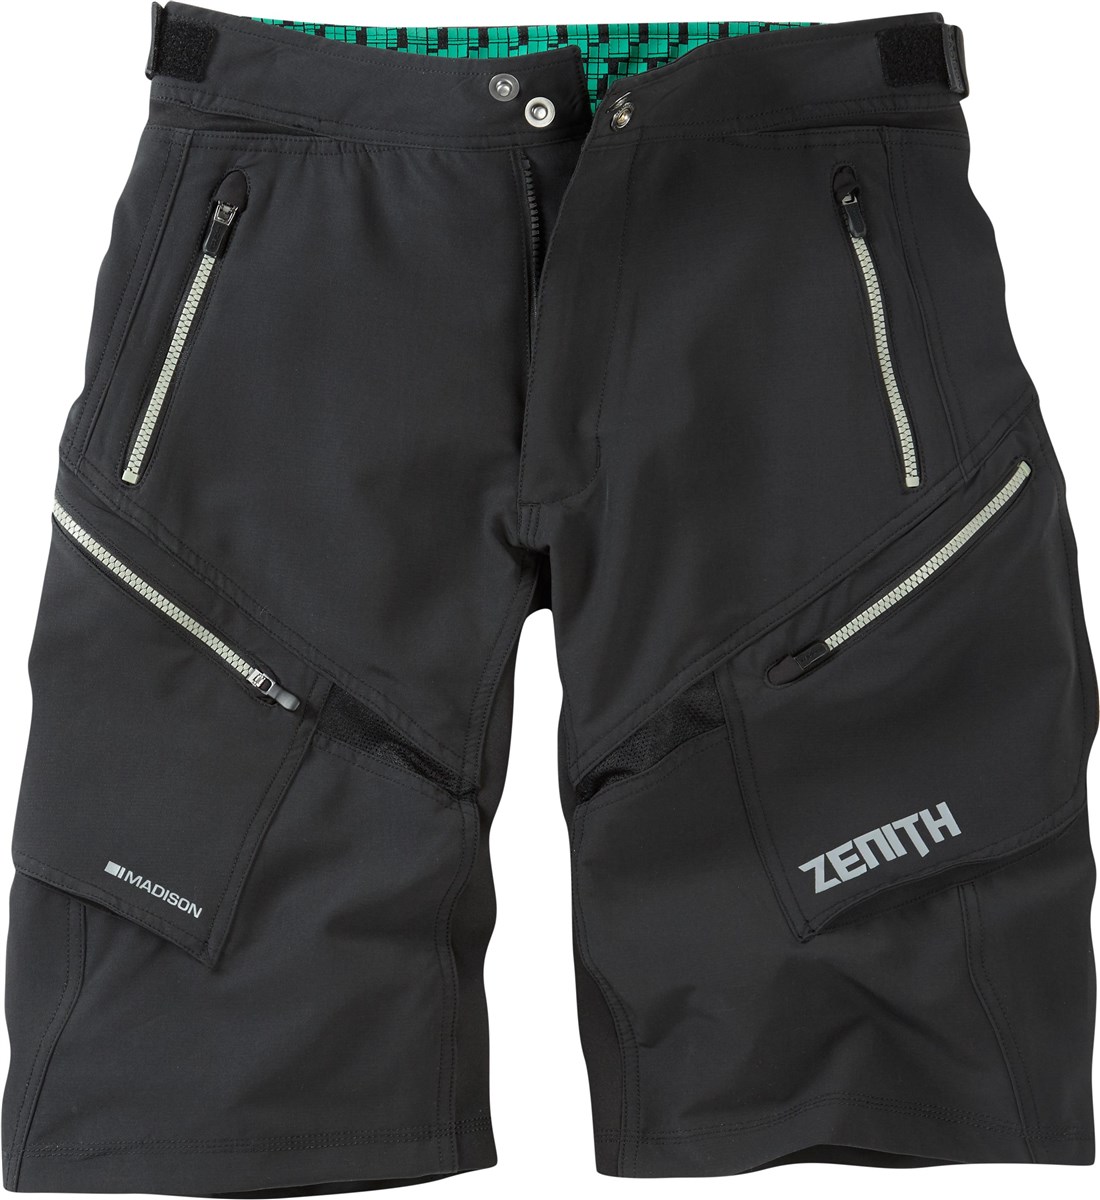 Madison Zenith Baggy Cycling Shorts product image